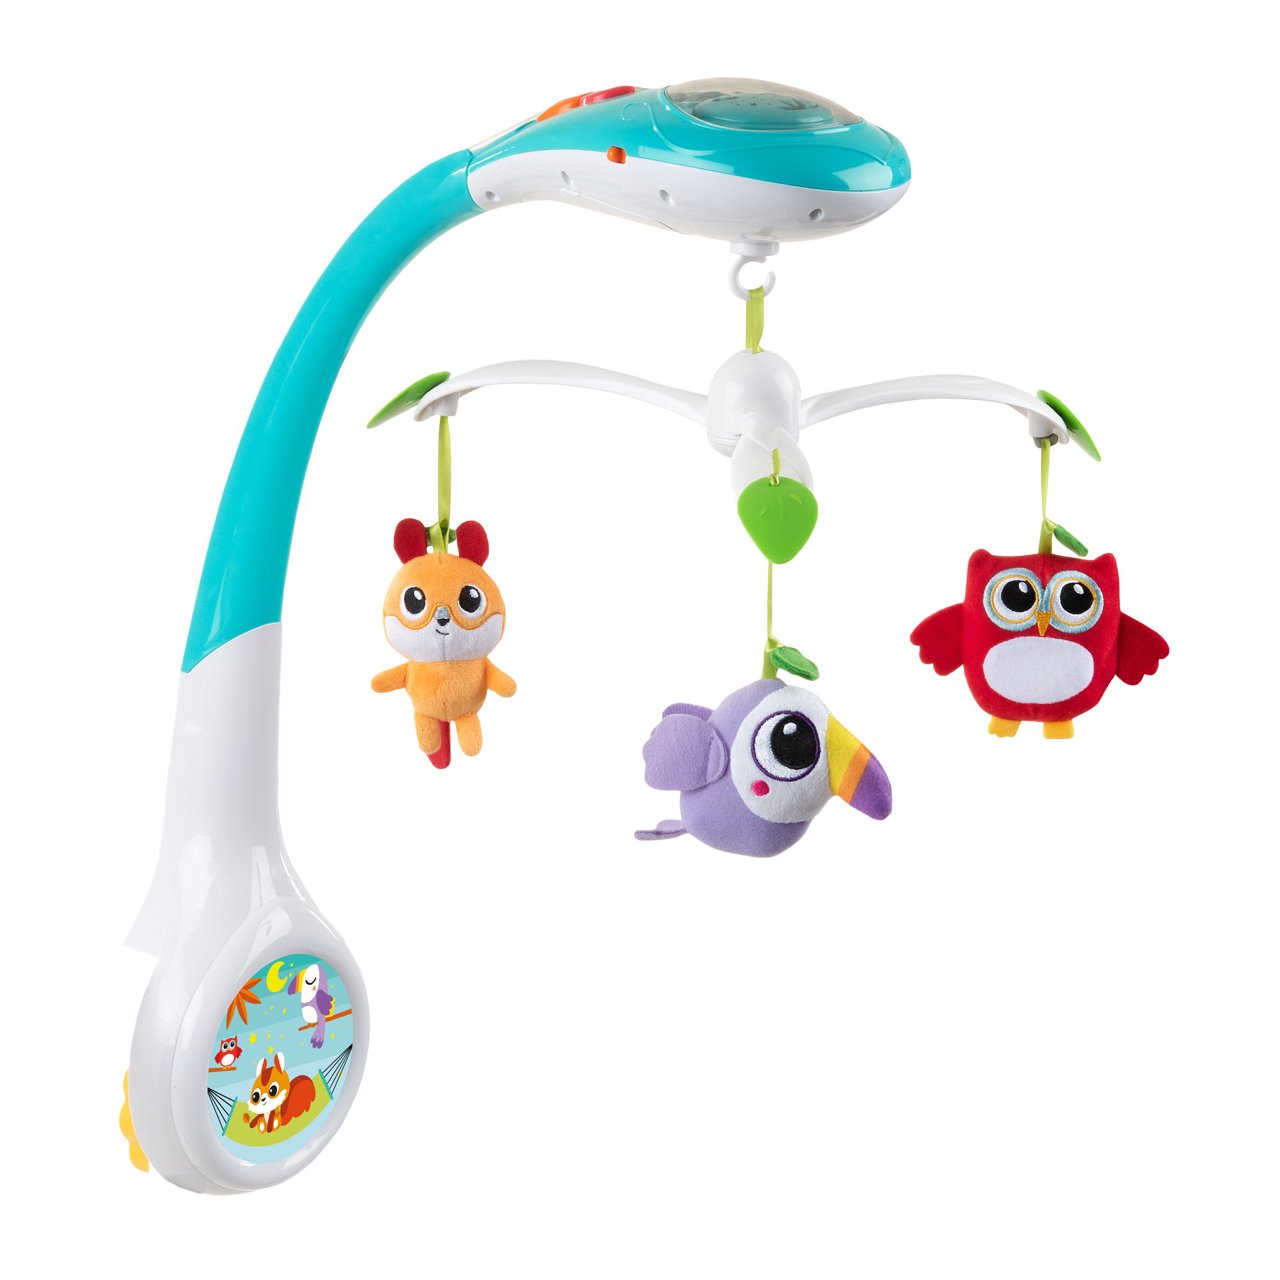 Magic Forest Cot Mobile Projector